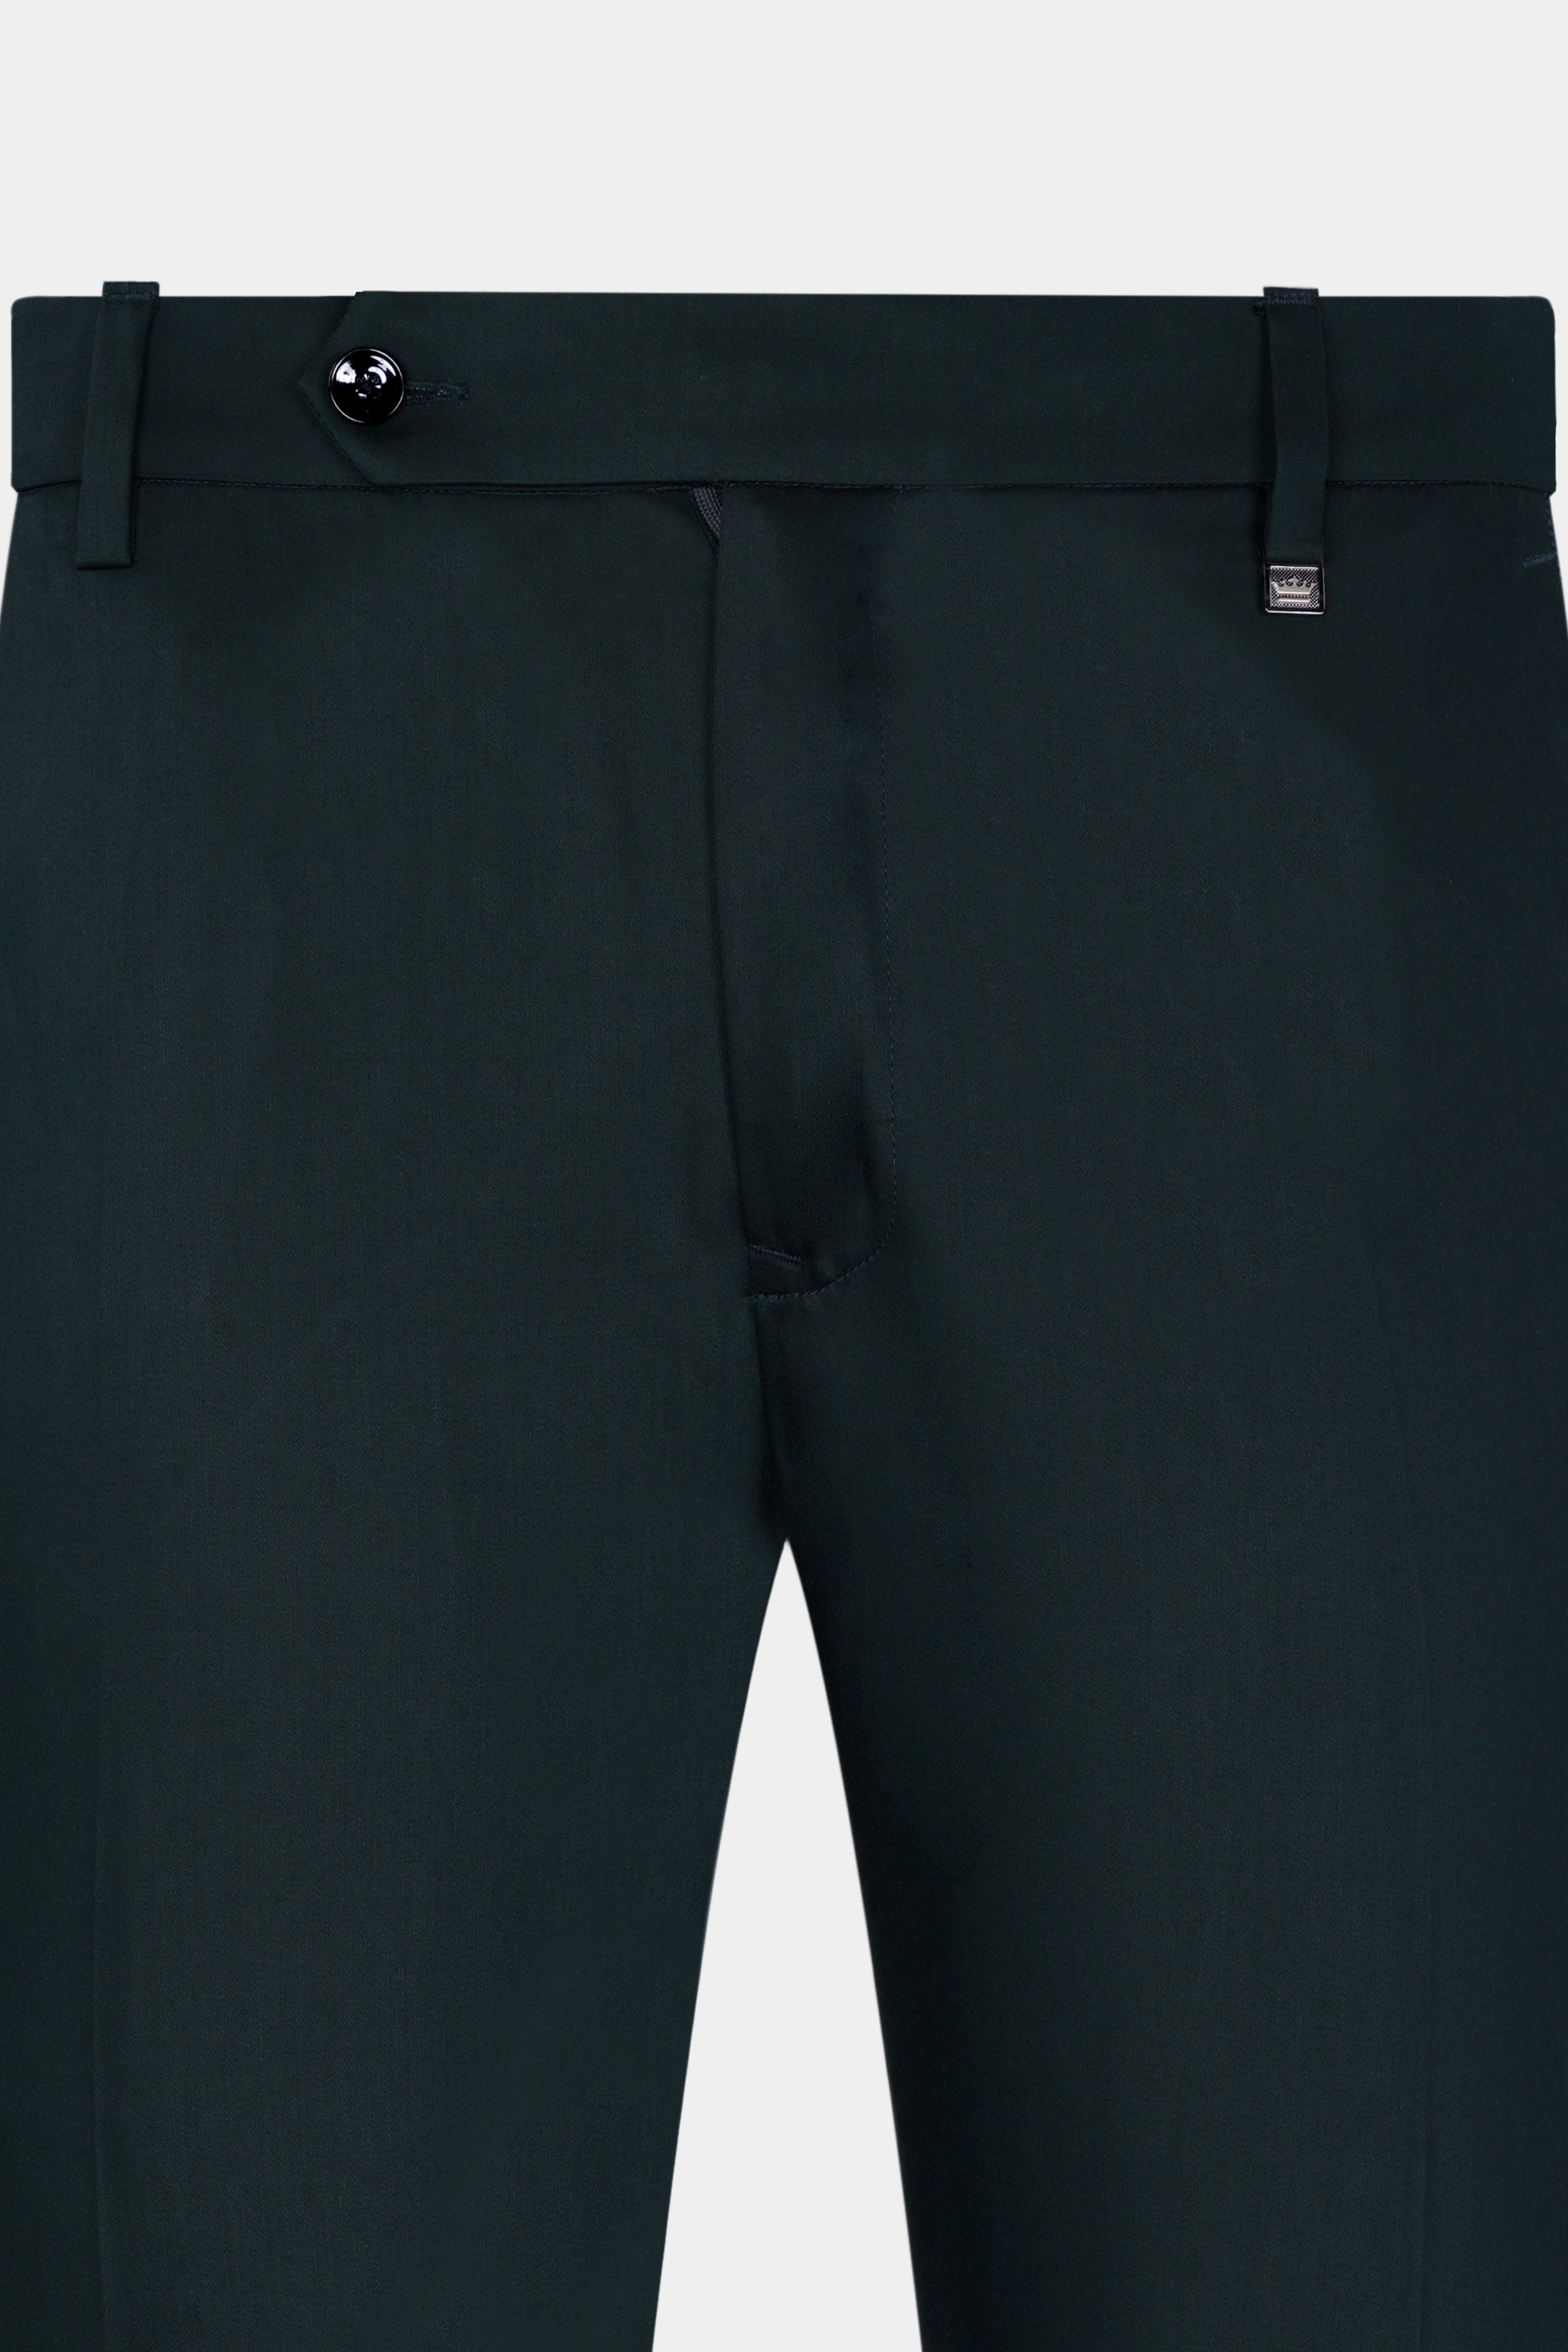 Raymond Excellence Woolen Greenish Unstitched Trouser Fabric - Buy Raymond  Excellence Woolen Greenish Unstitched Trouser Fabric Online at Best Prices  in India on Snapdeal